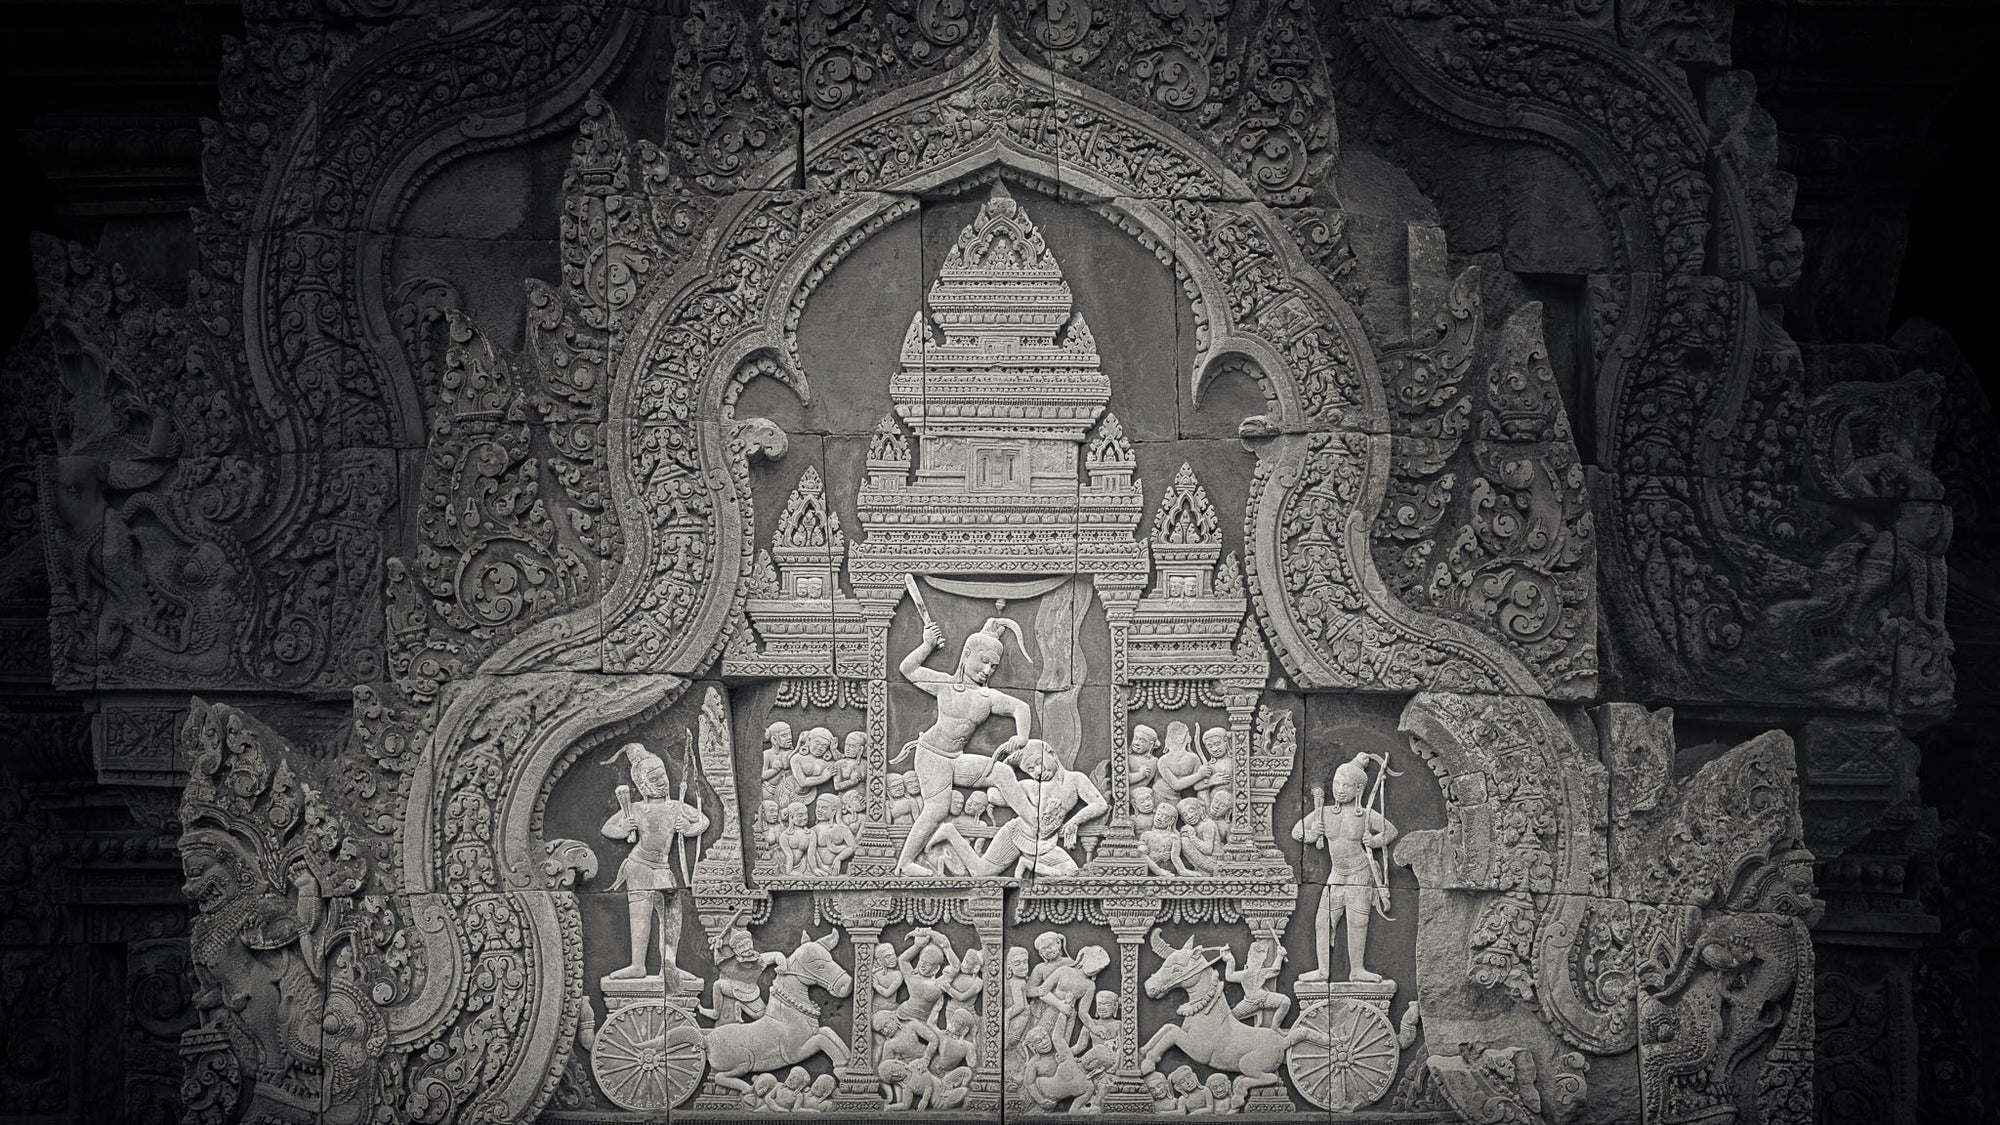 The Bas-Reliefs of Angkor